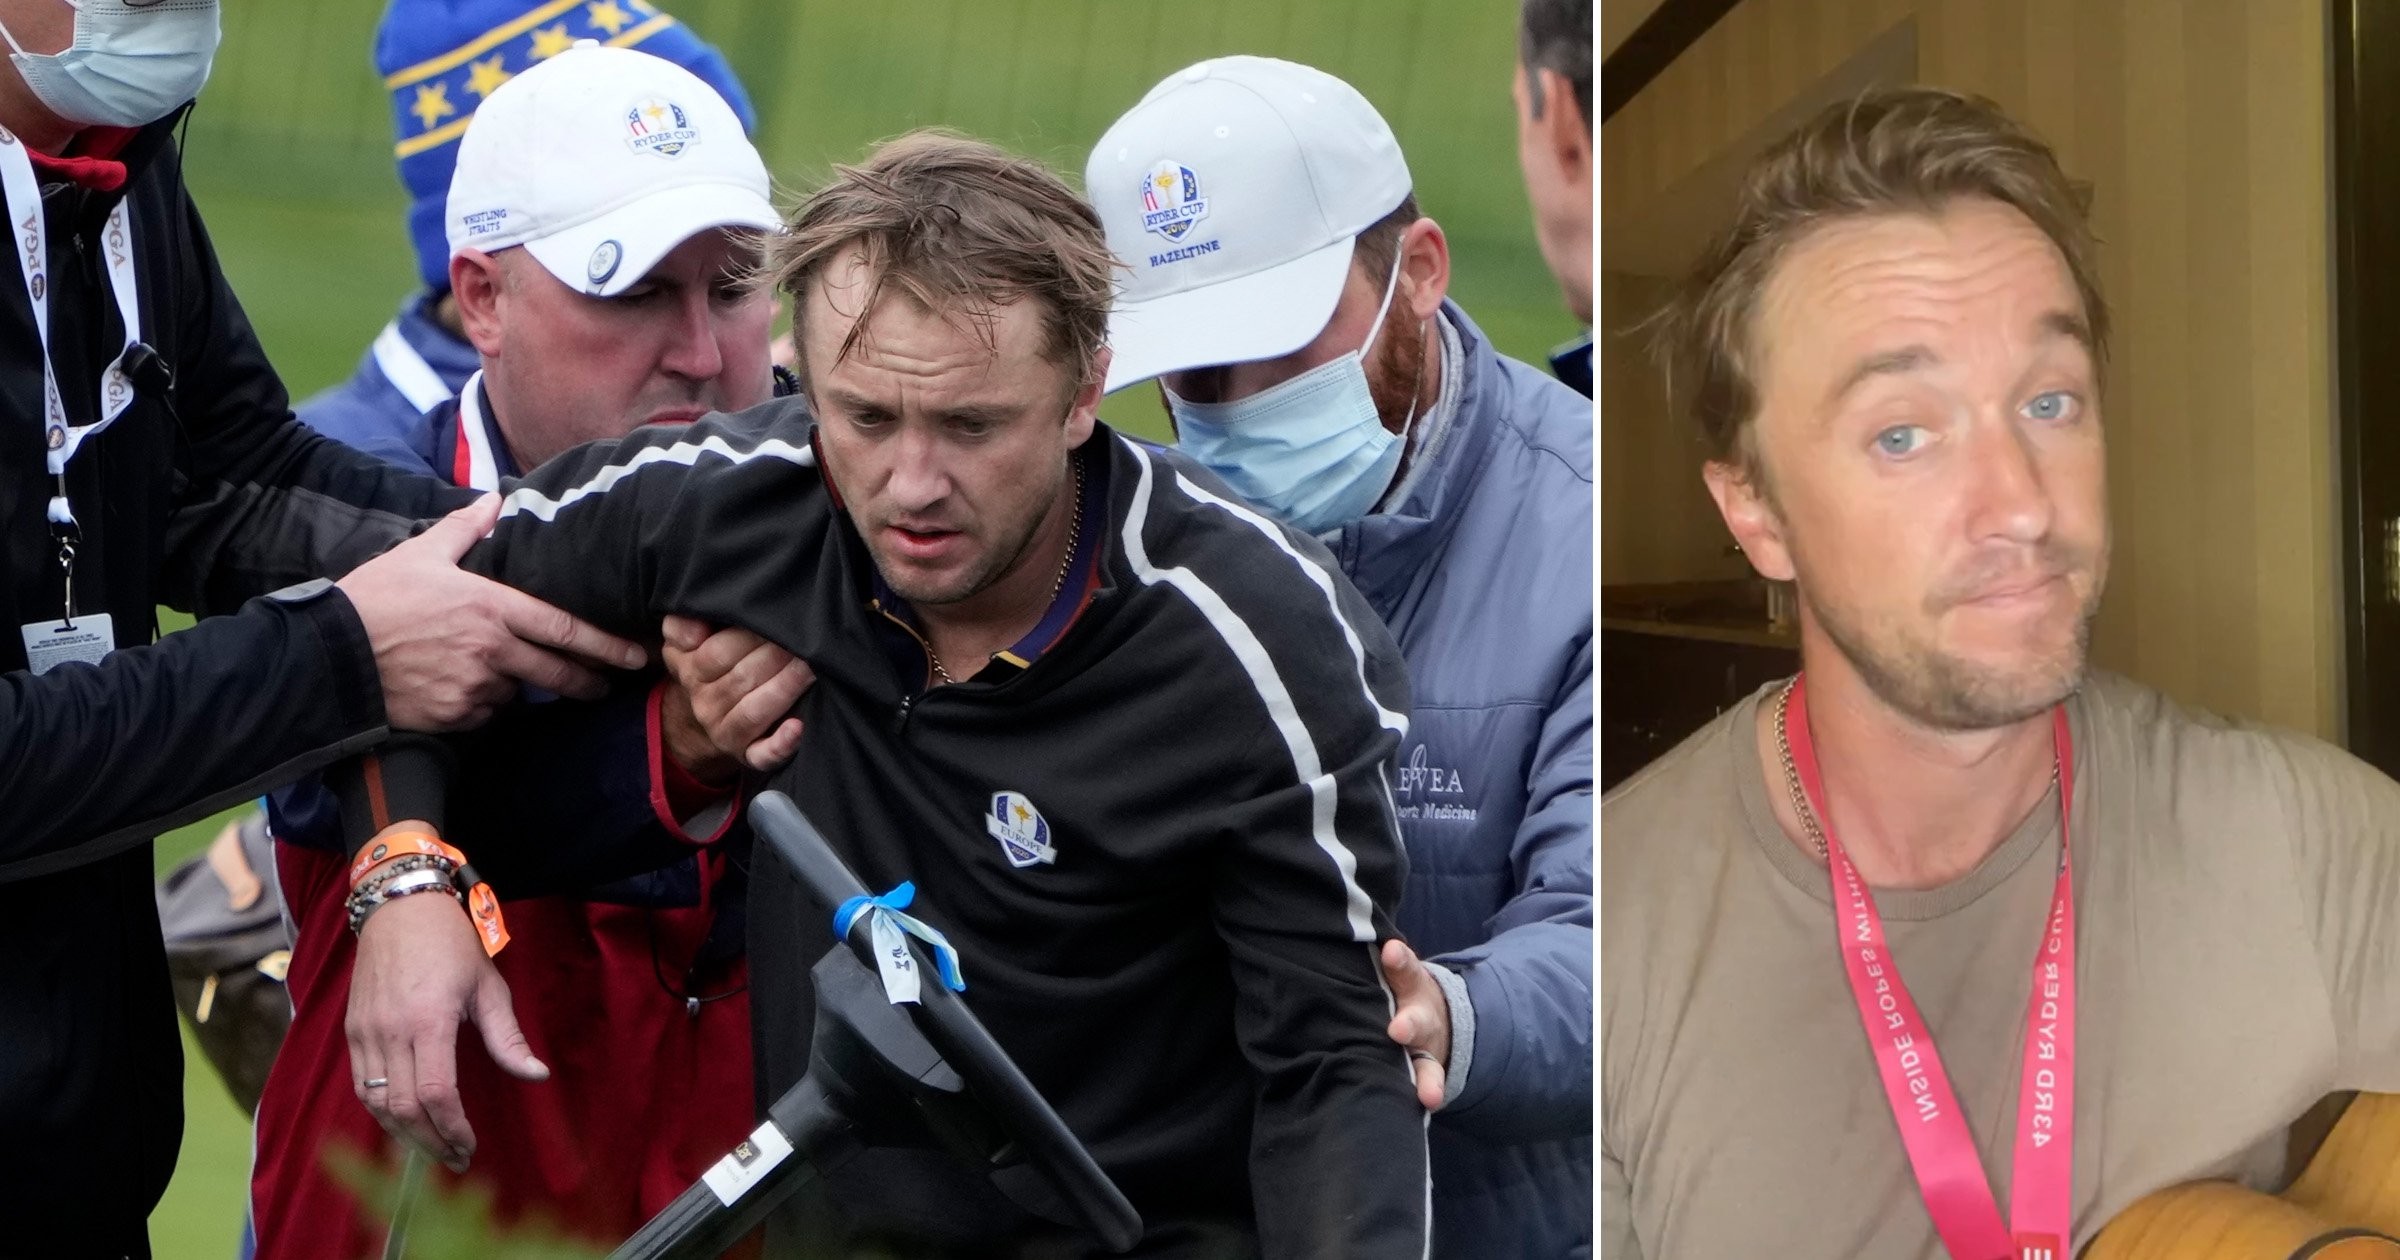 Tom Felton reassures fans he is ‘on the mend’ after ‘scary’ collapse on golf course